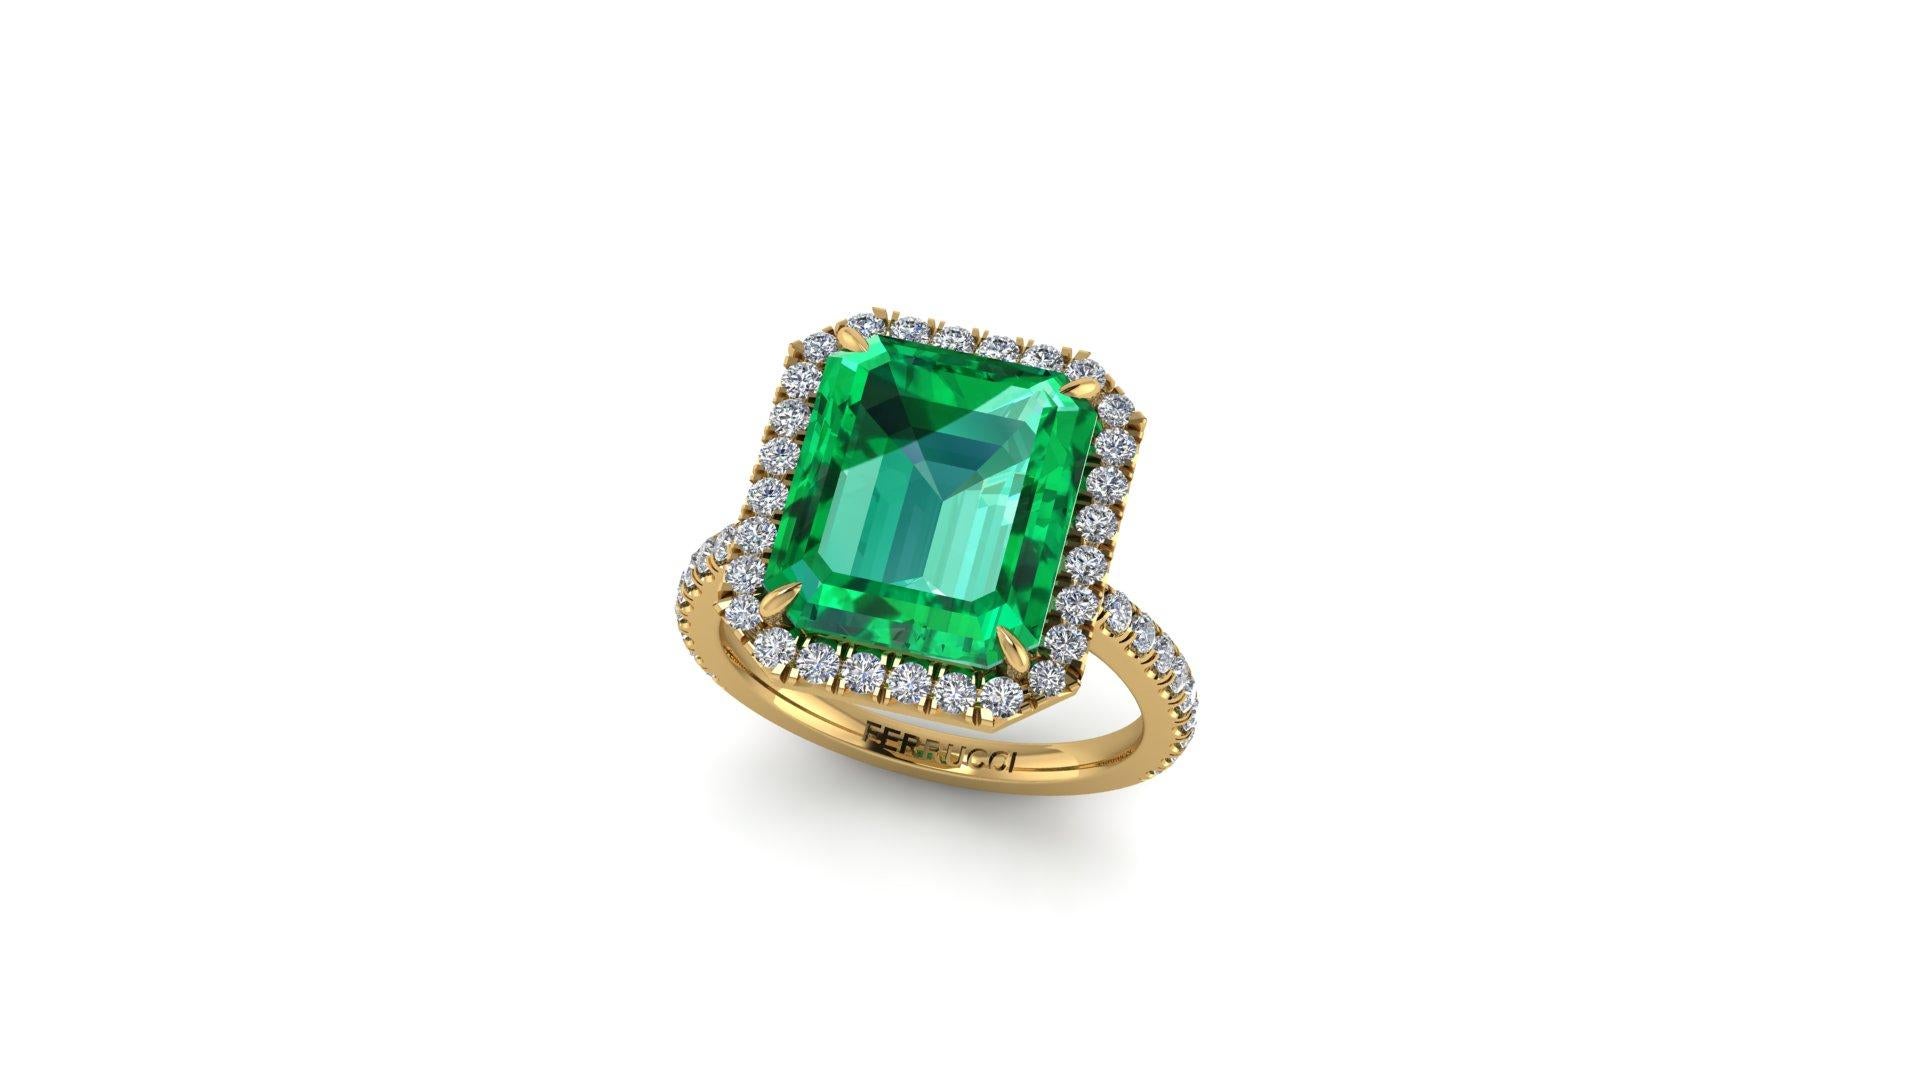 5.75 ct Emerald, GIA Certified stunning clean mineral, with only a few natural inclusions typical of the Emerald. 
Diamond's Halo and Diamond pave' set on the shank, for an approximate total carat weight of 0.65 carats, G color, VS clarity,
made in 